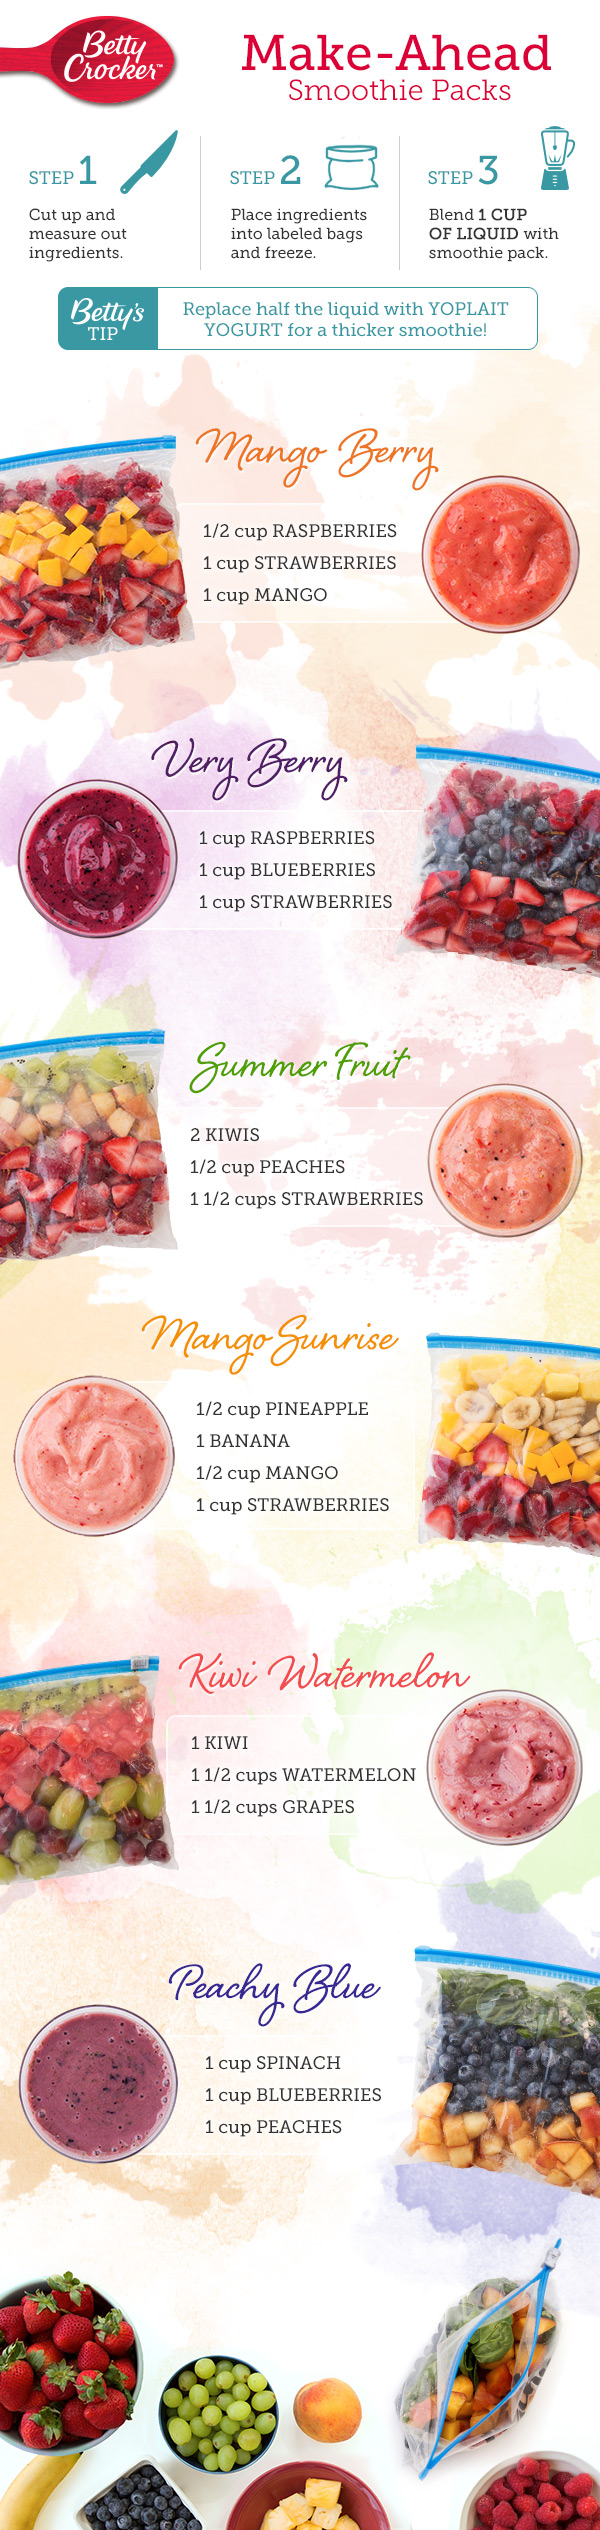 Refreshing Make-Ahead Smoothie Pack Recipes Infographic